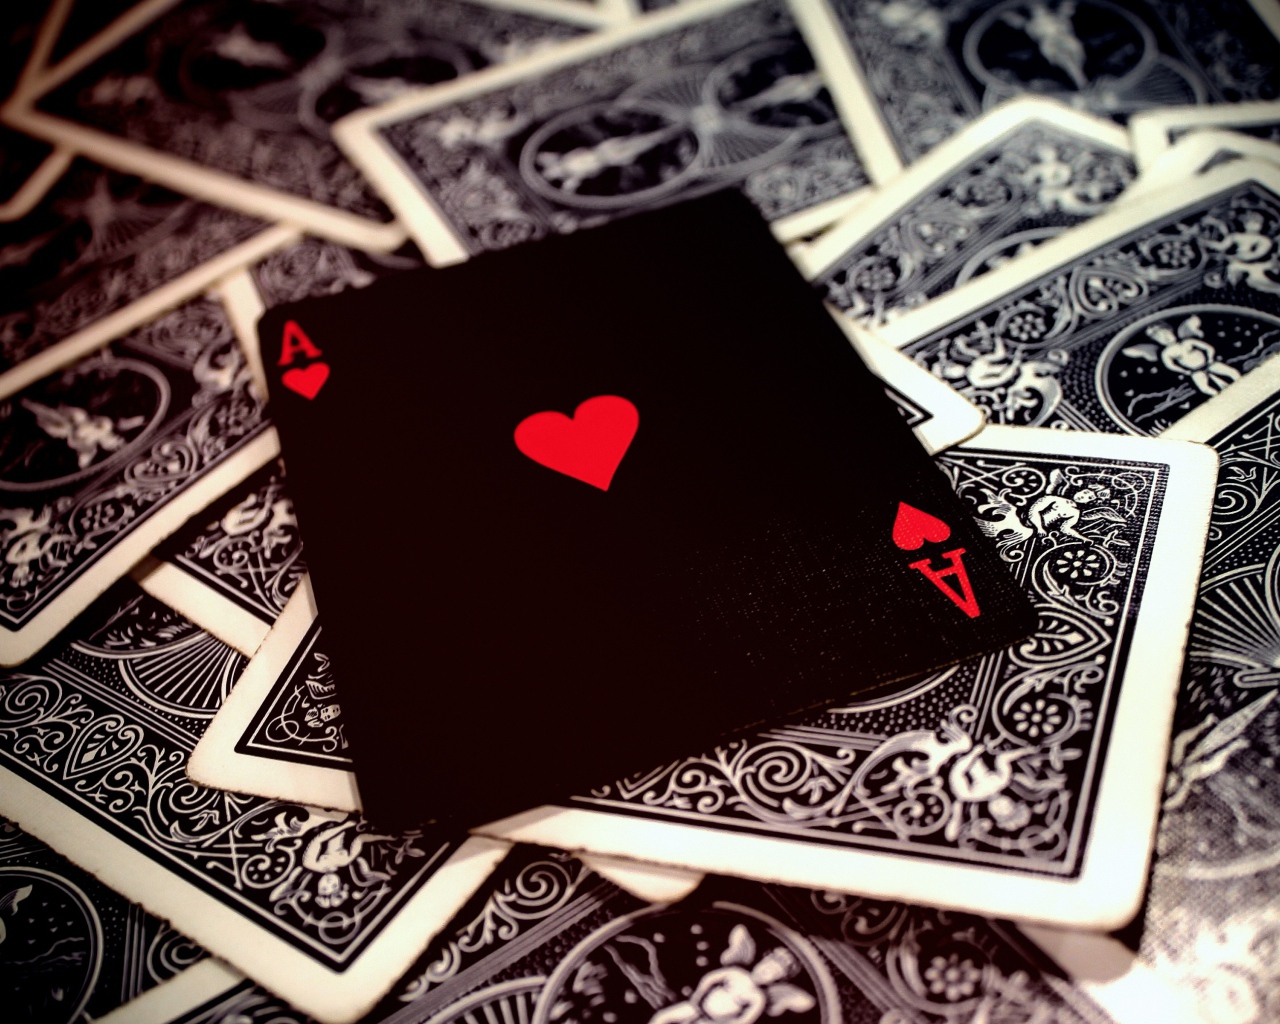 Ace of hearts lies on a deck of cards